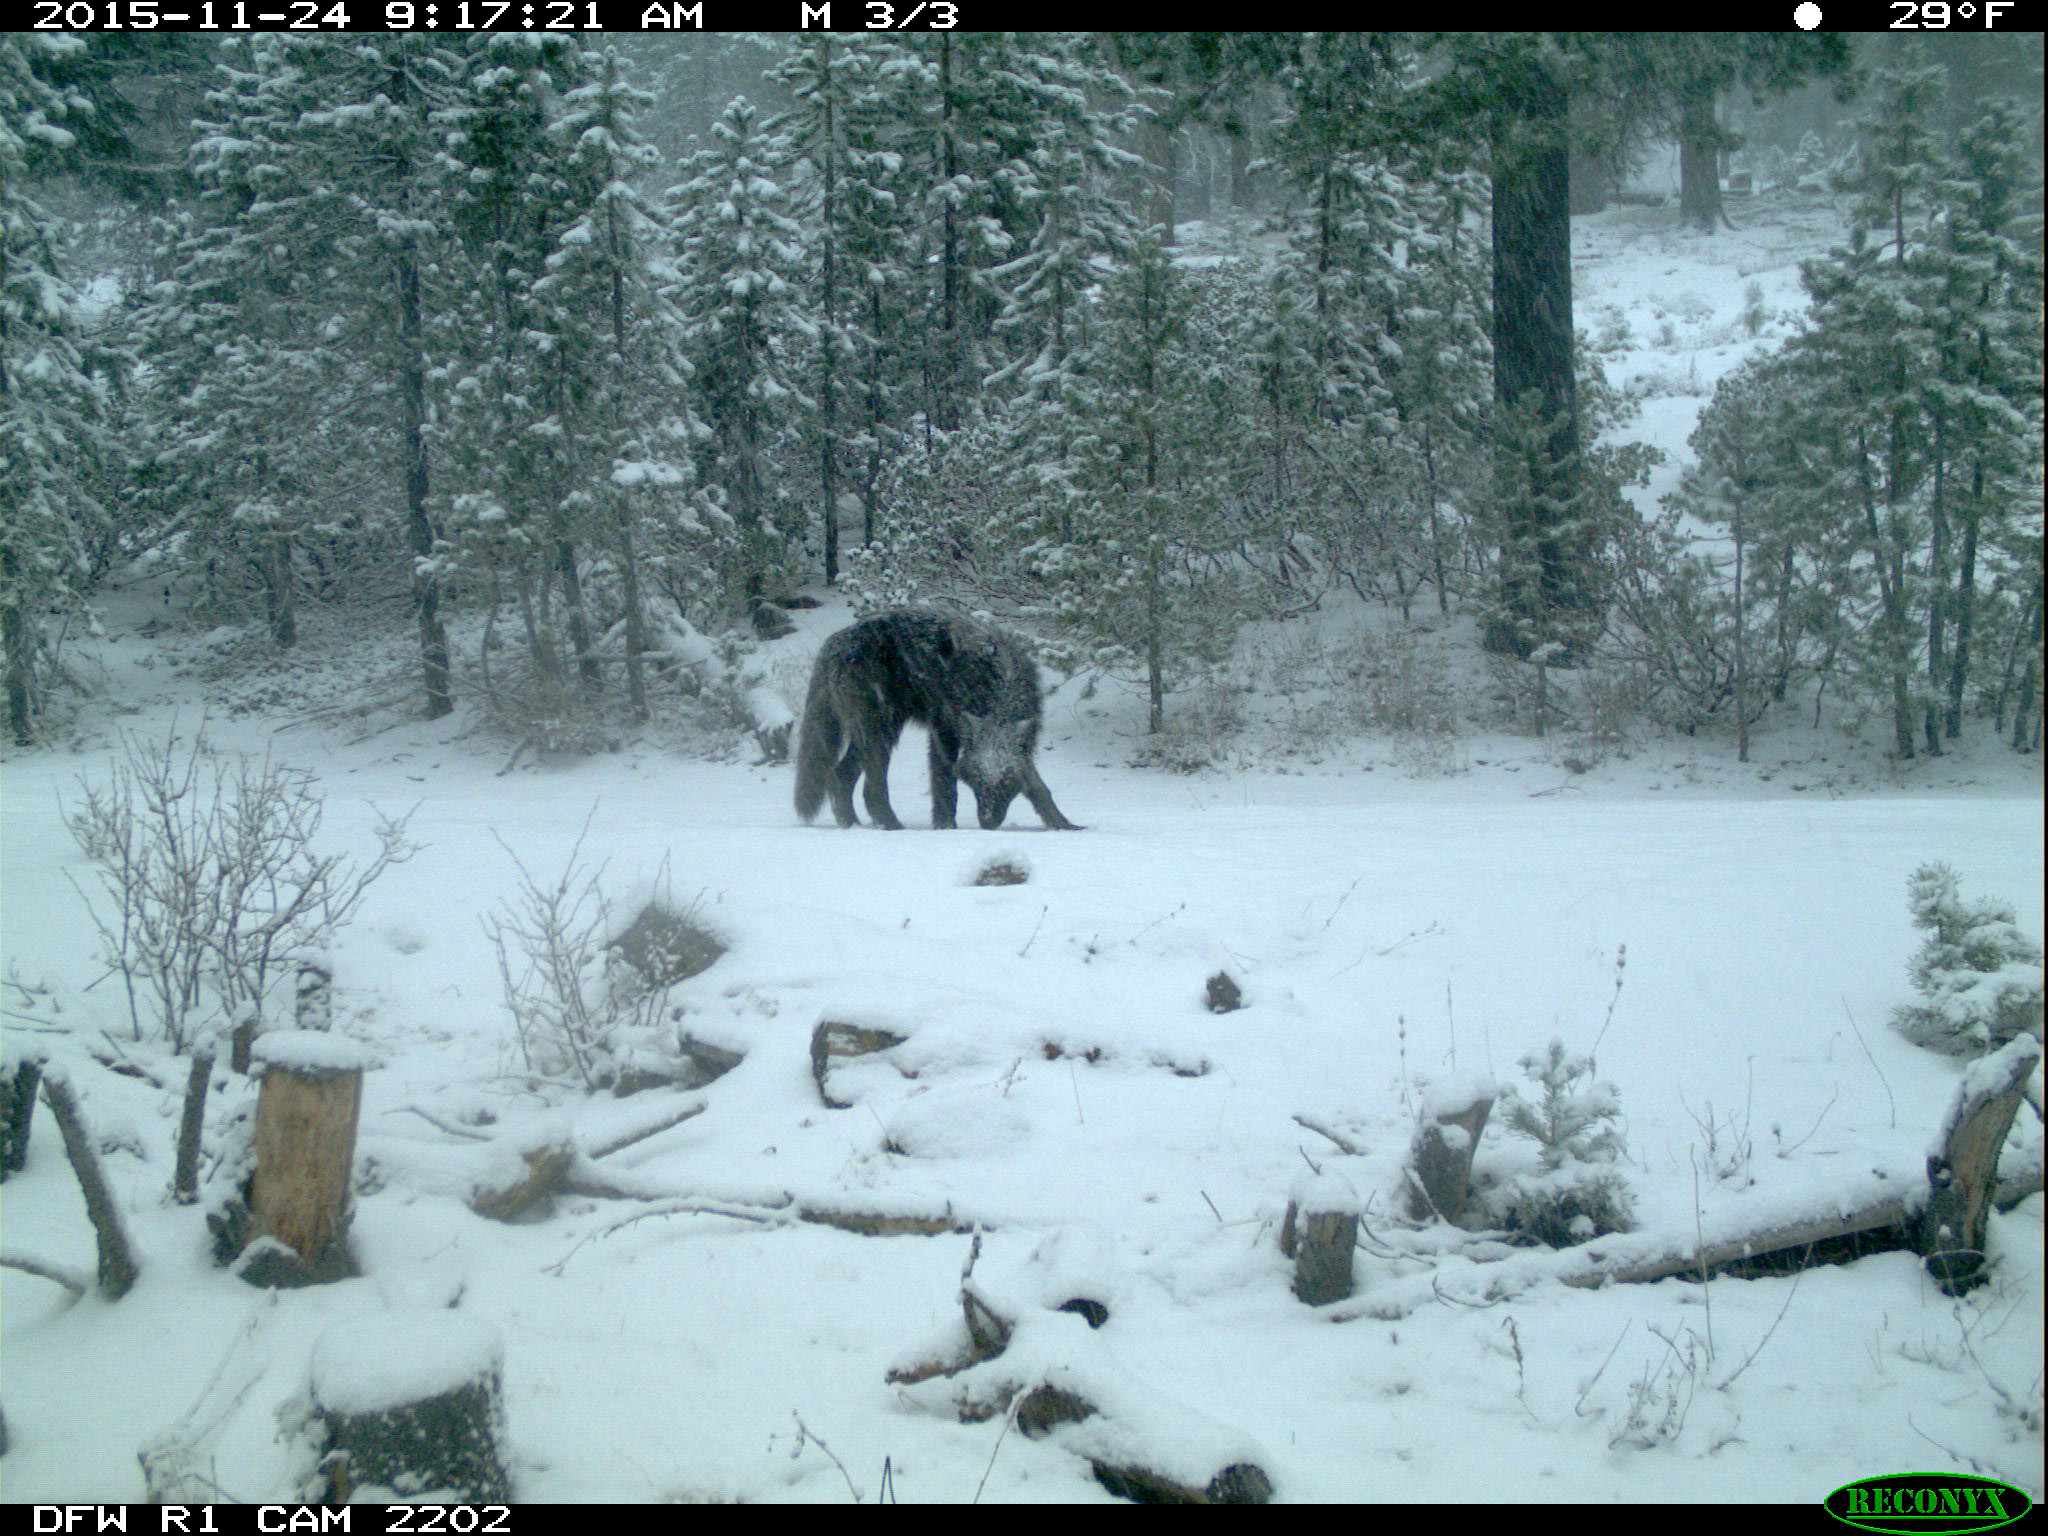 There’s a new wolf pack in California, wildlife officials confirmed